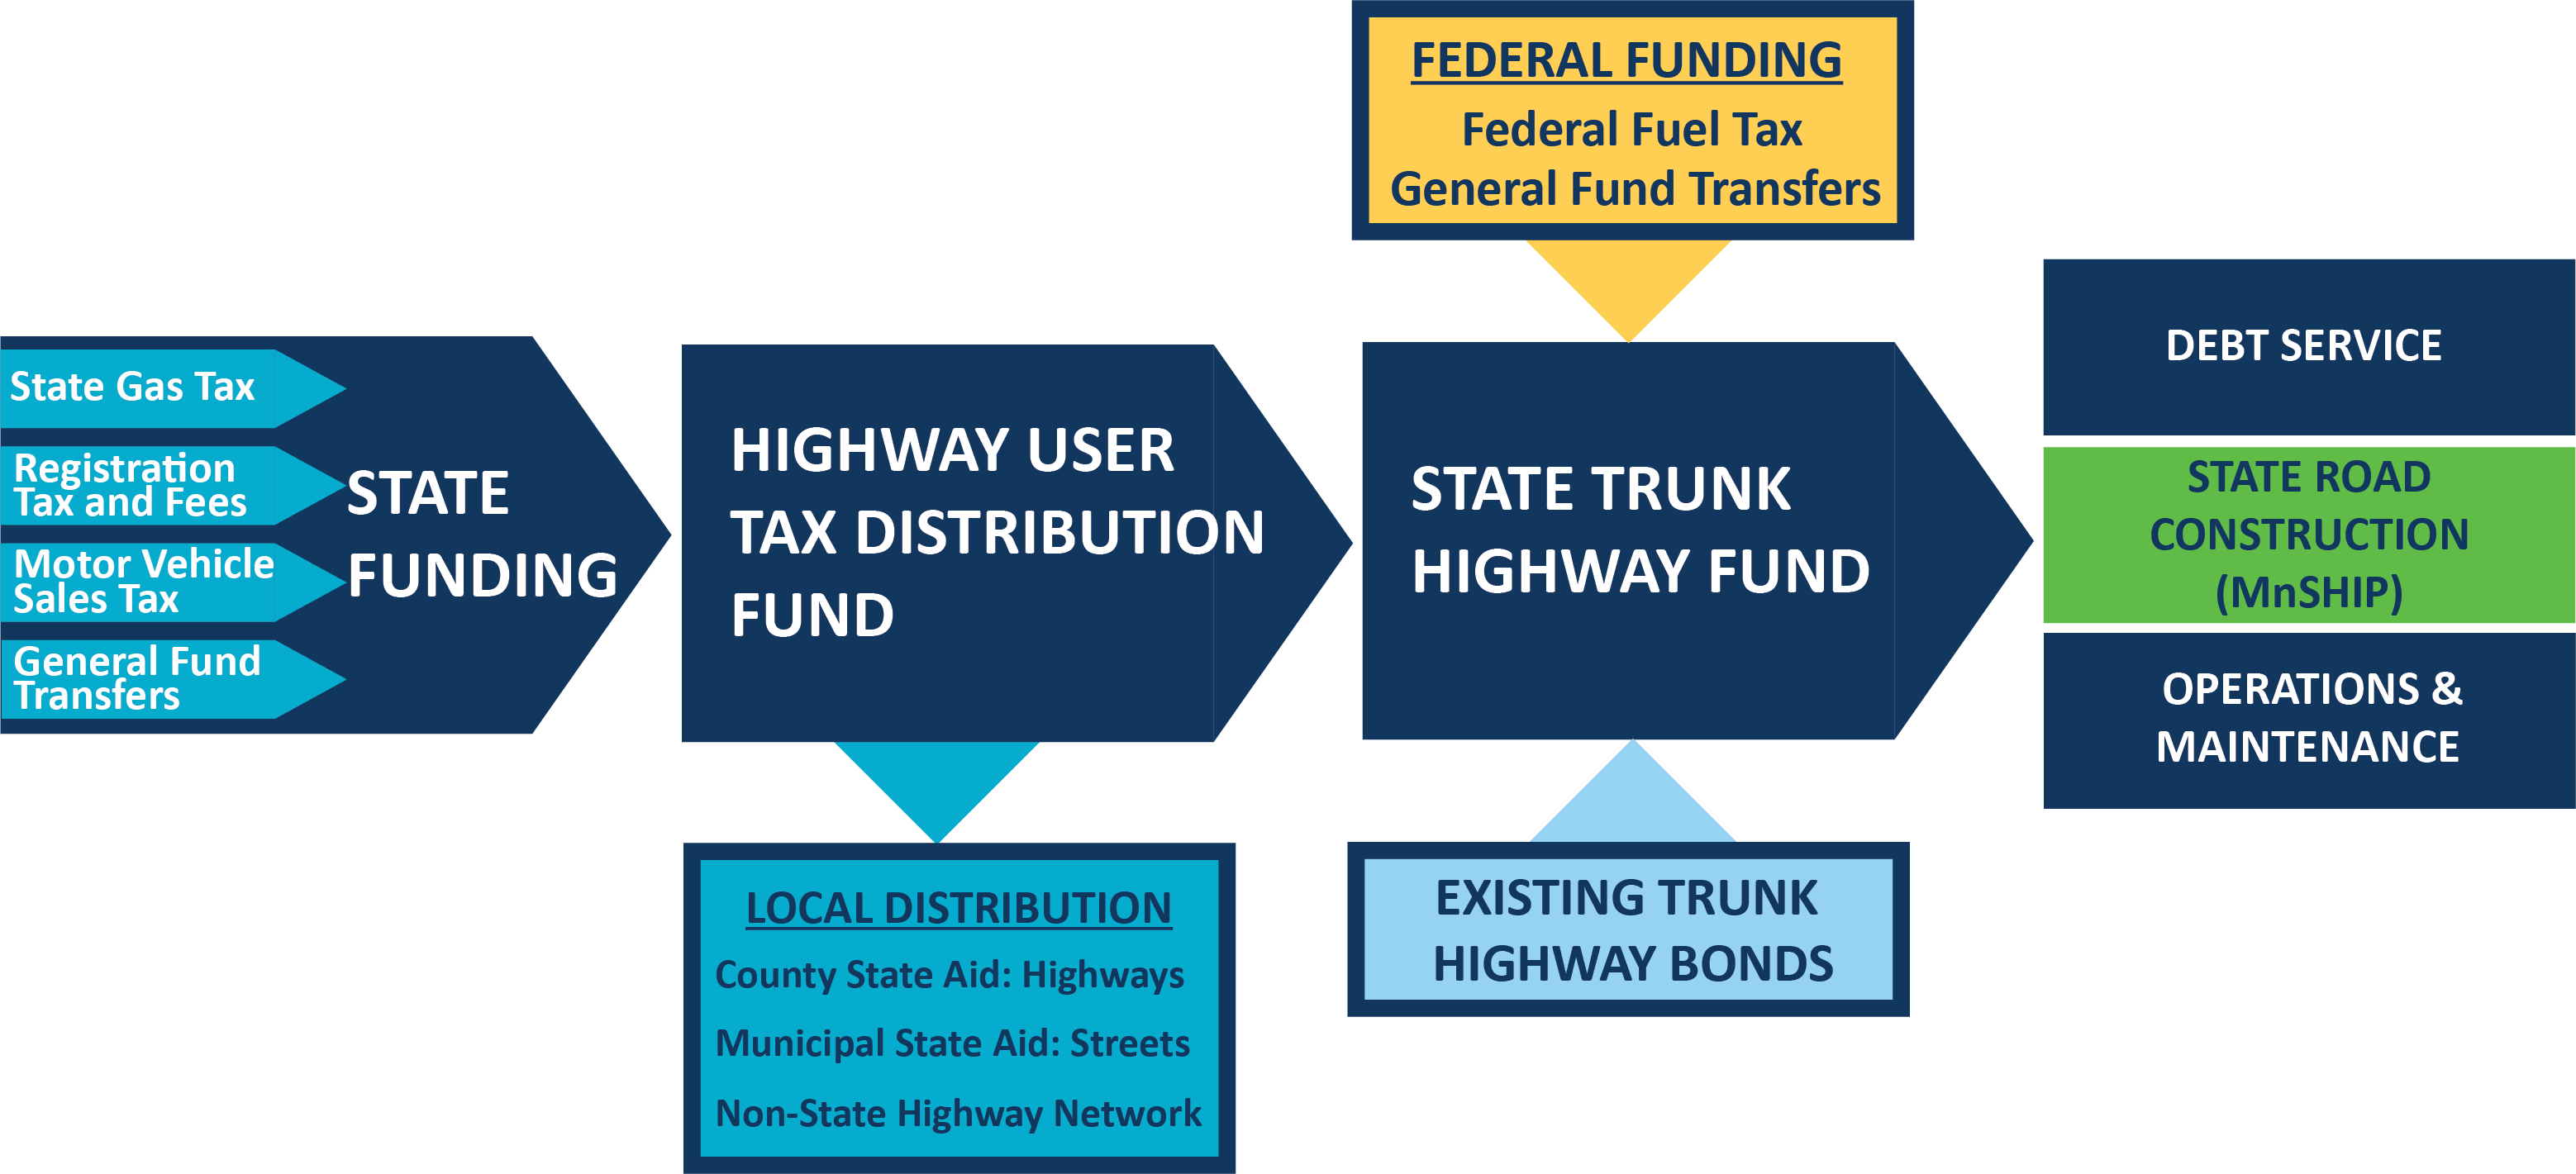 Flow chart showing the state Funding going to supporting Highway user tax distribution, local distributions and then the State Trunk Highway Fun, the State Trunk Fund also has Trunk highway bonds, as well as federal funds. This then leads into the state road Construction (MNSHIP), operations and maintenance and debt service.